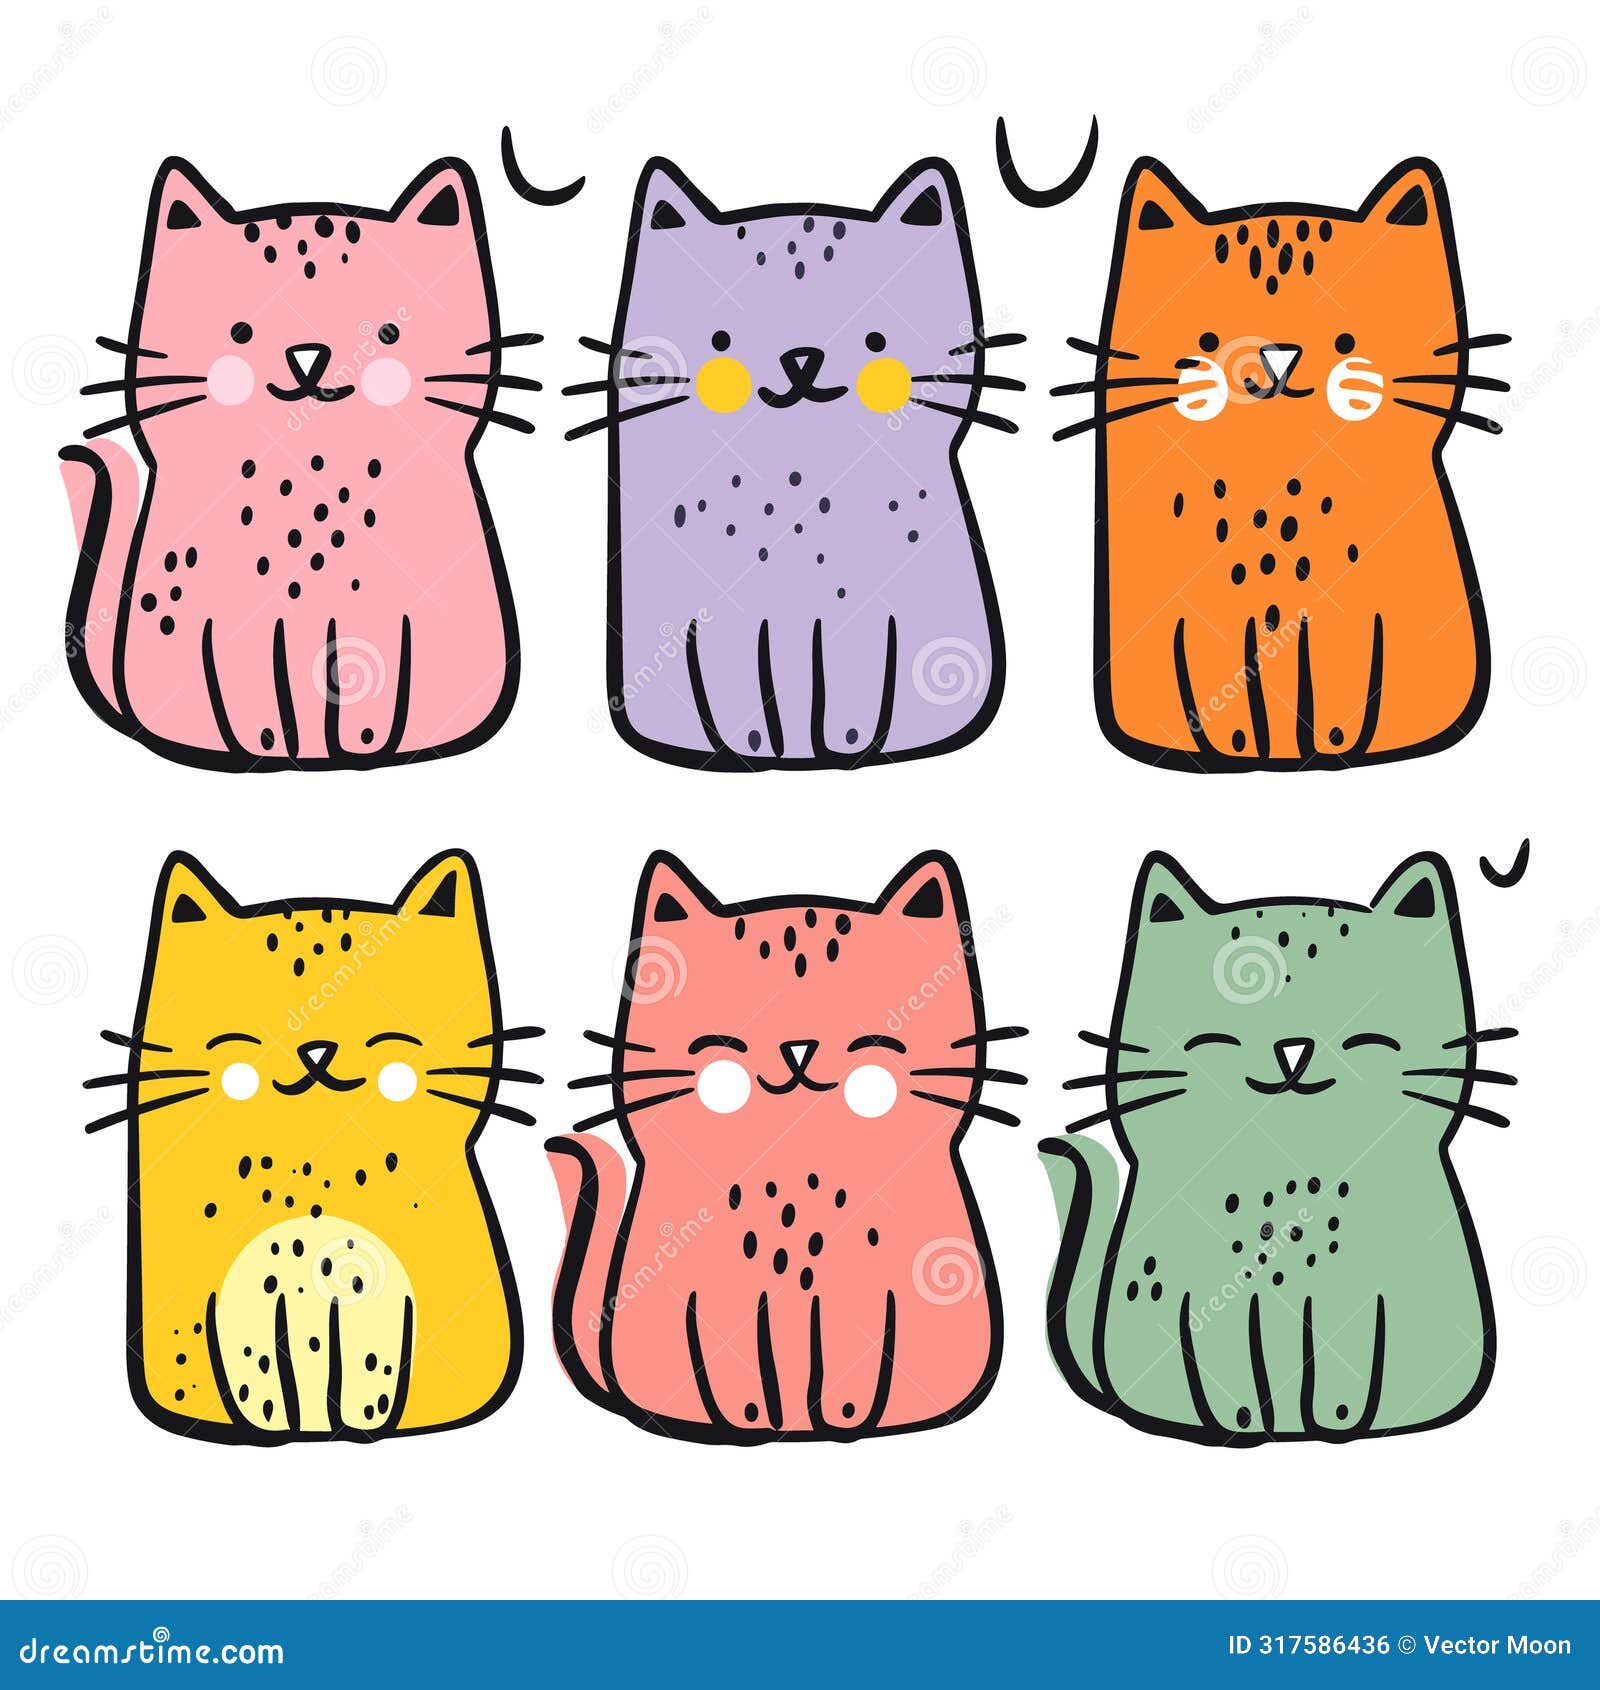 six colorful cute cartoon cats various expressions. cats sitting simple outlines, whiskers